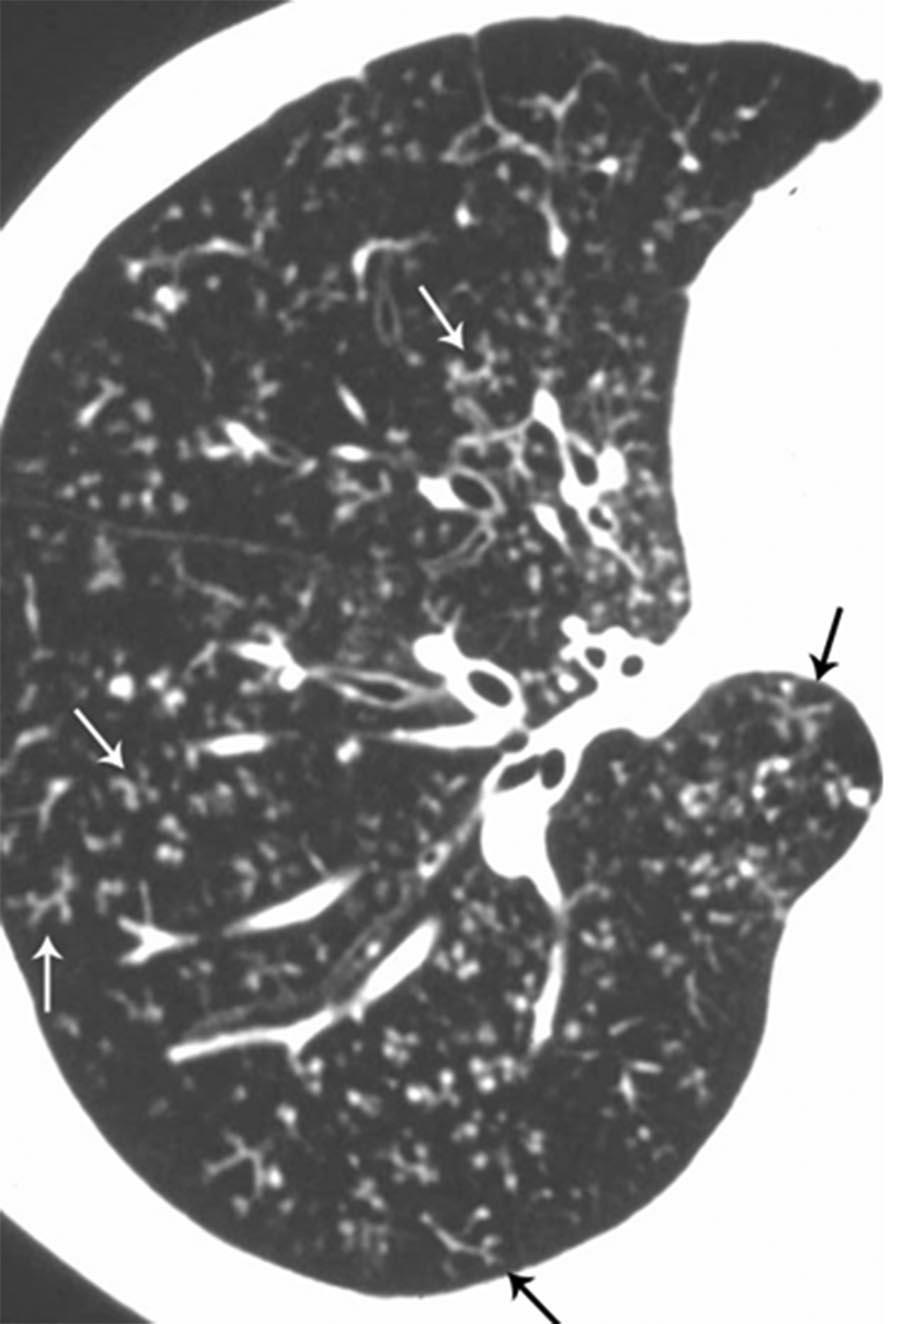 Ground-glass nodules with prominent tree-in-bud opacities Appearance of an irregular and often nodular branching structure, most easily identified in the lung periphery Represents